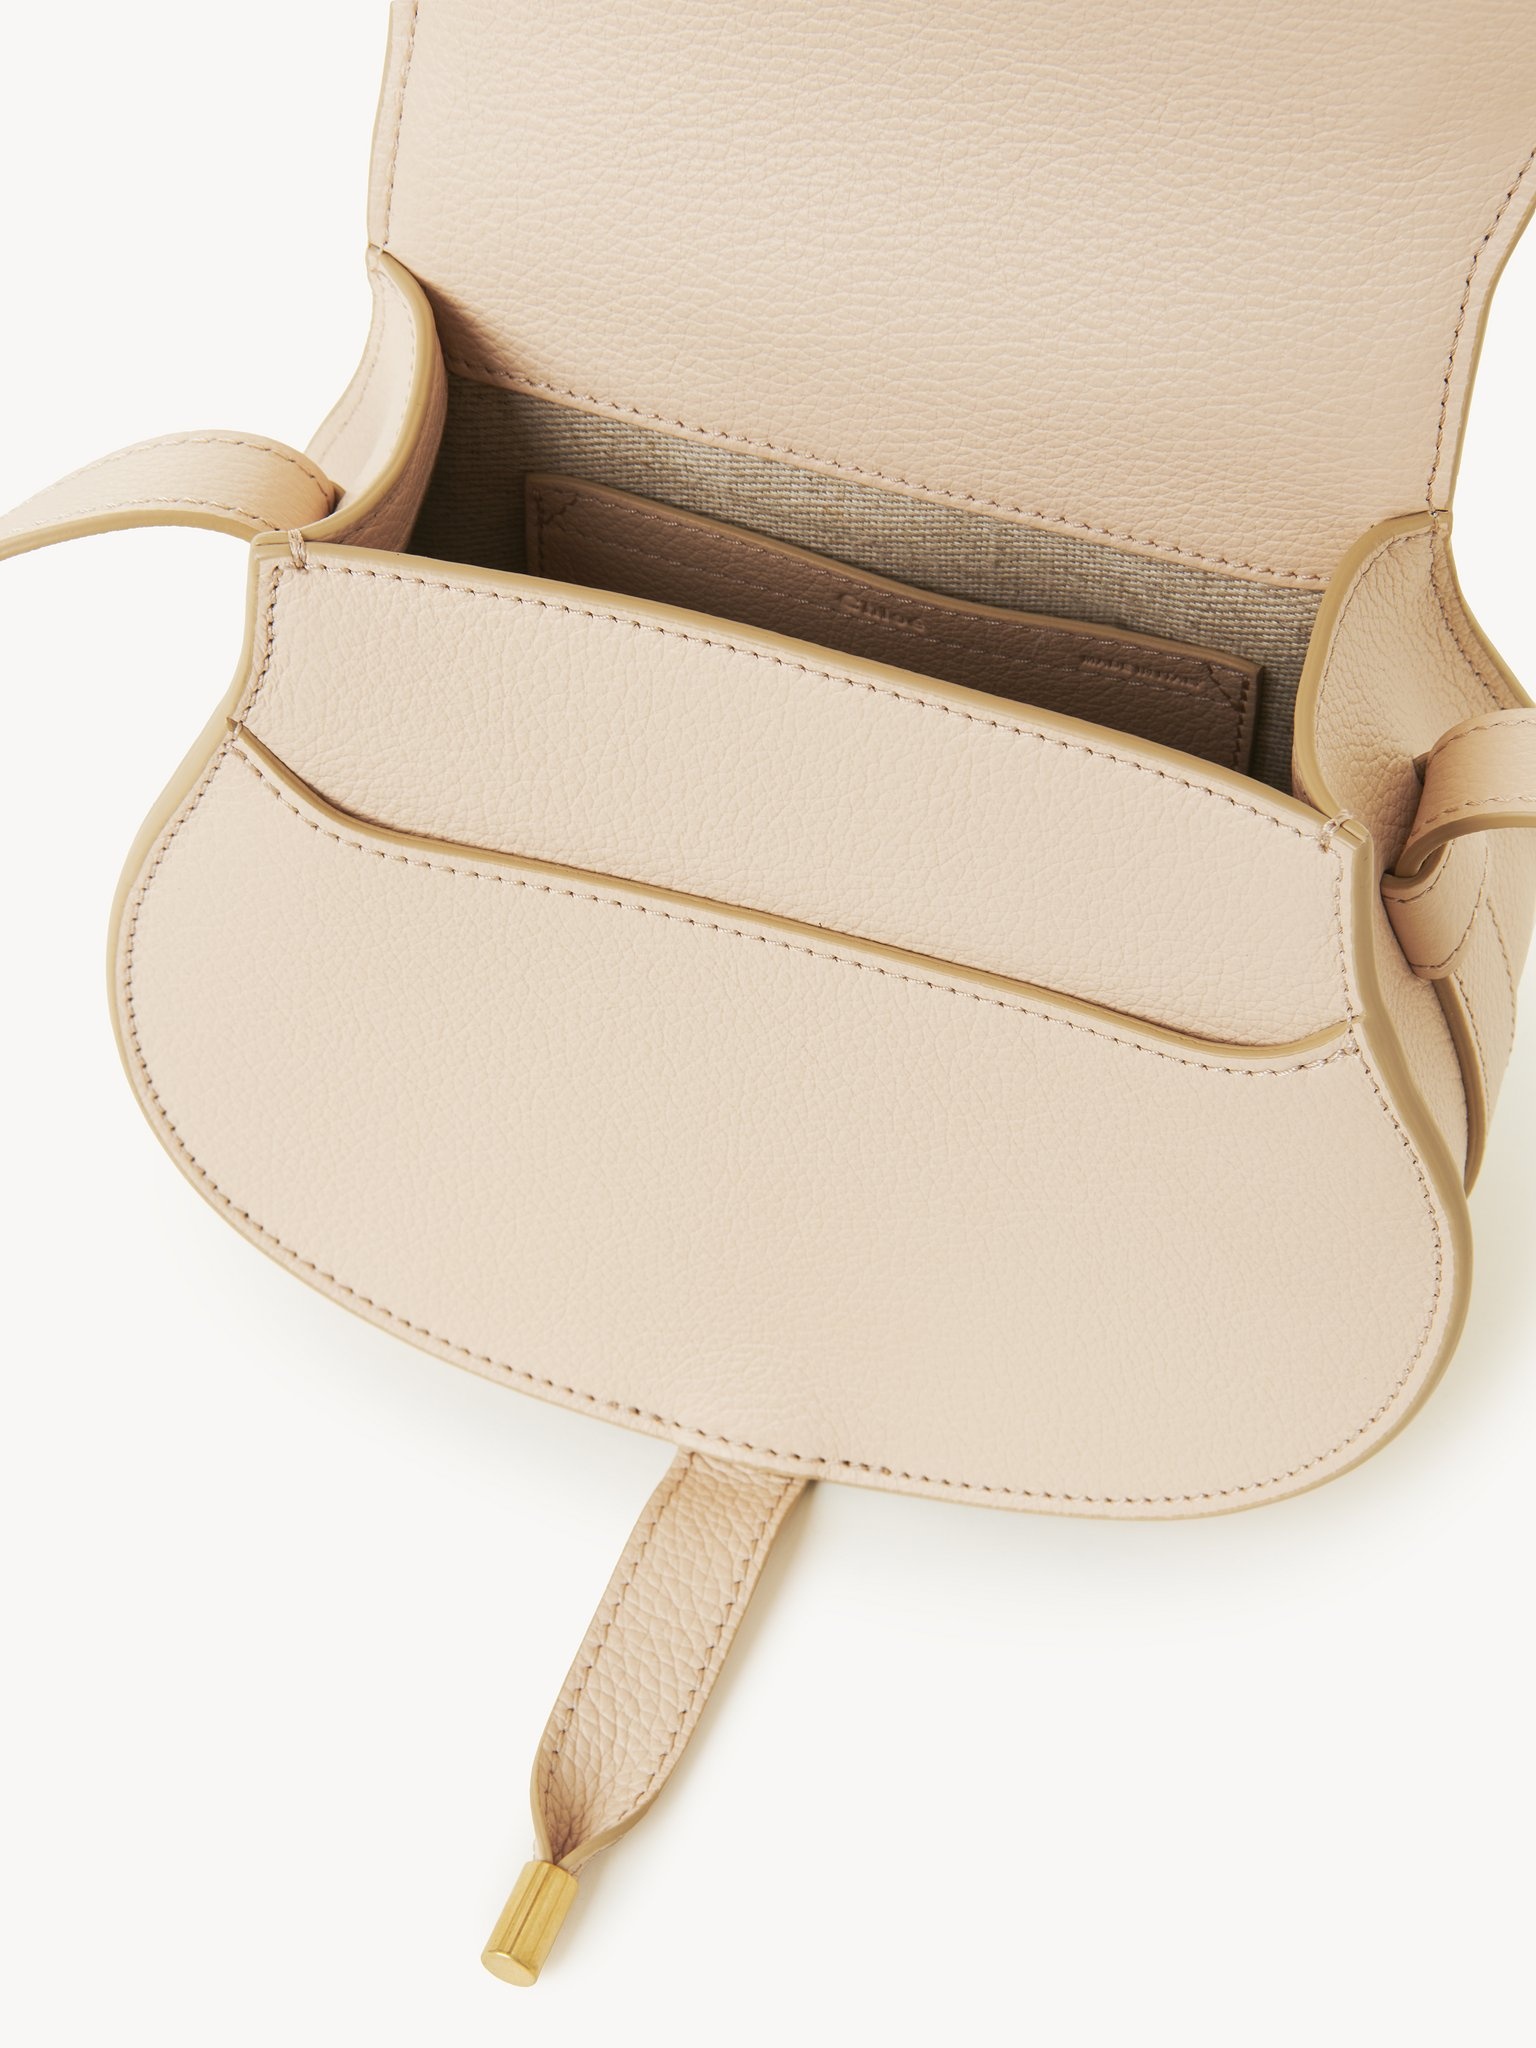 SMALL MARCIE SADDLE BAG IN GRAINED LEATHER - 5